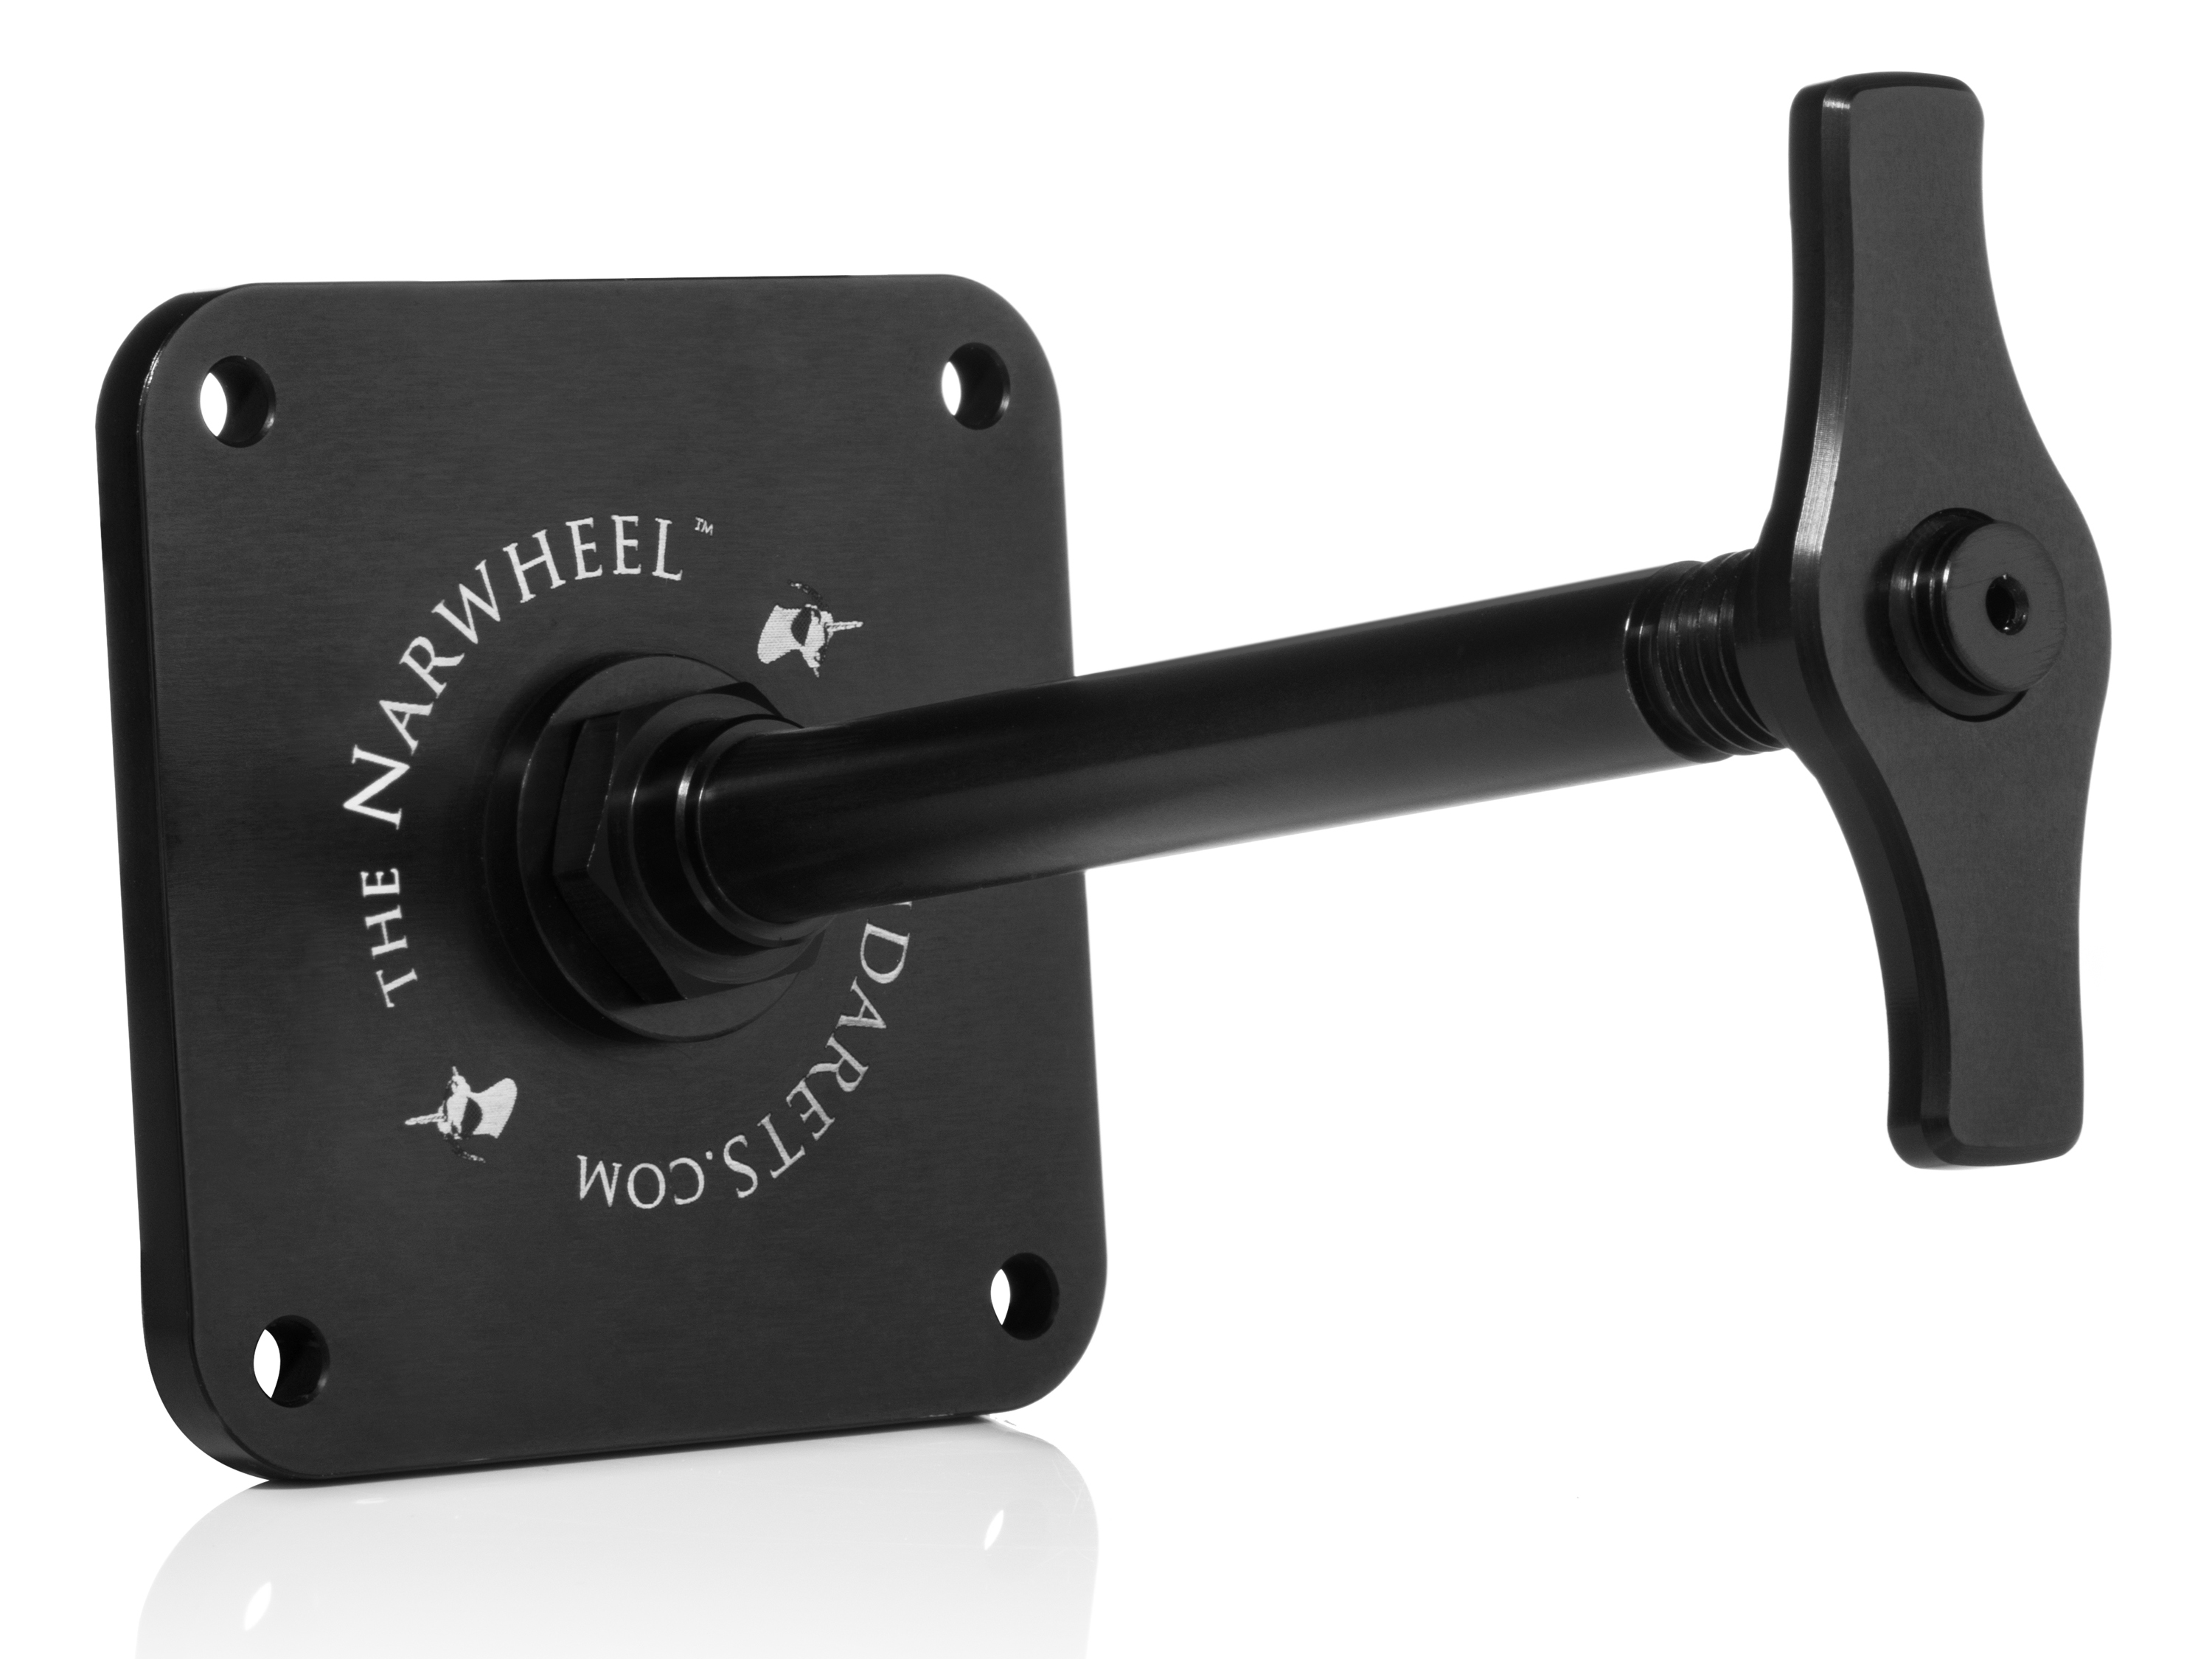 Narwheels exist! Lindarets’ thru axle wheel mounts available for your shop or vehicle